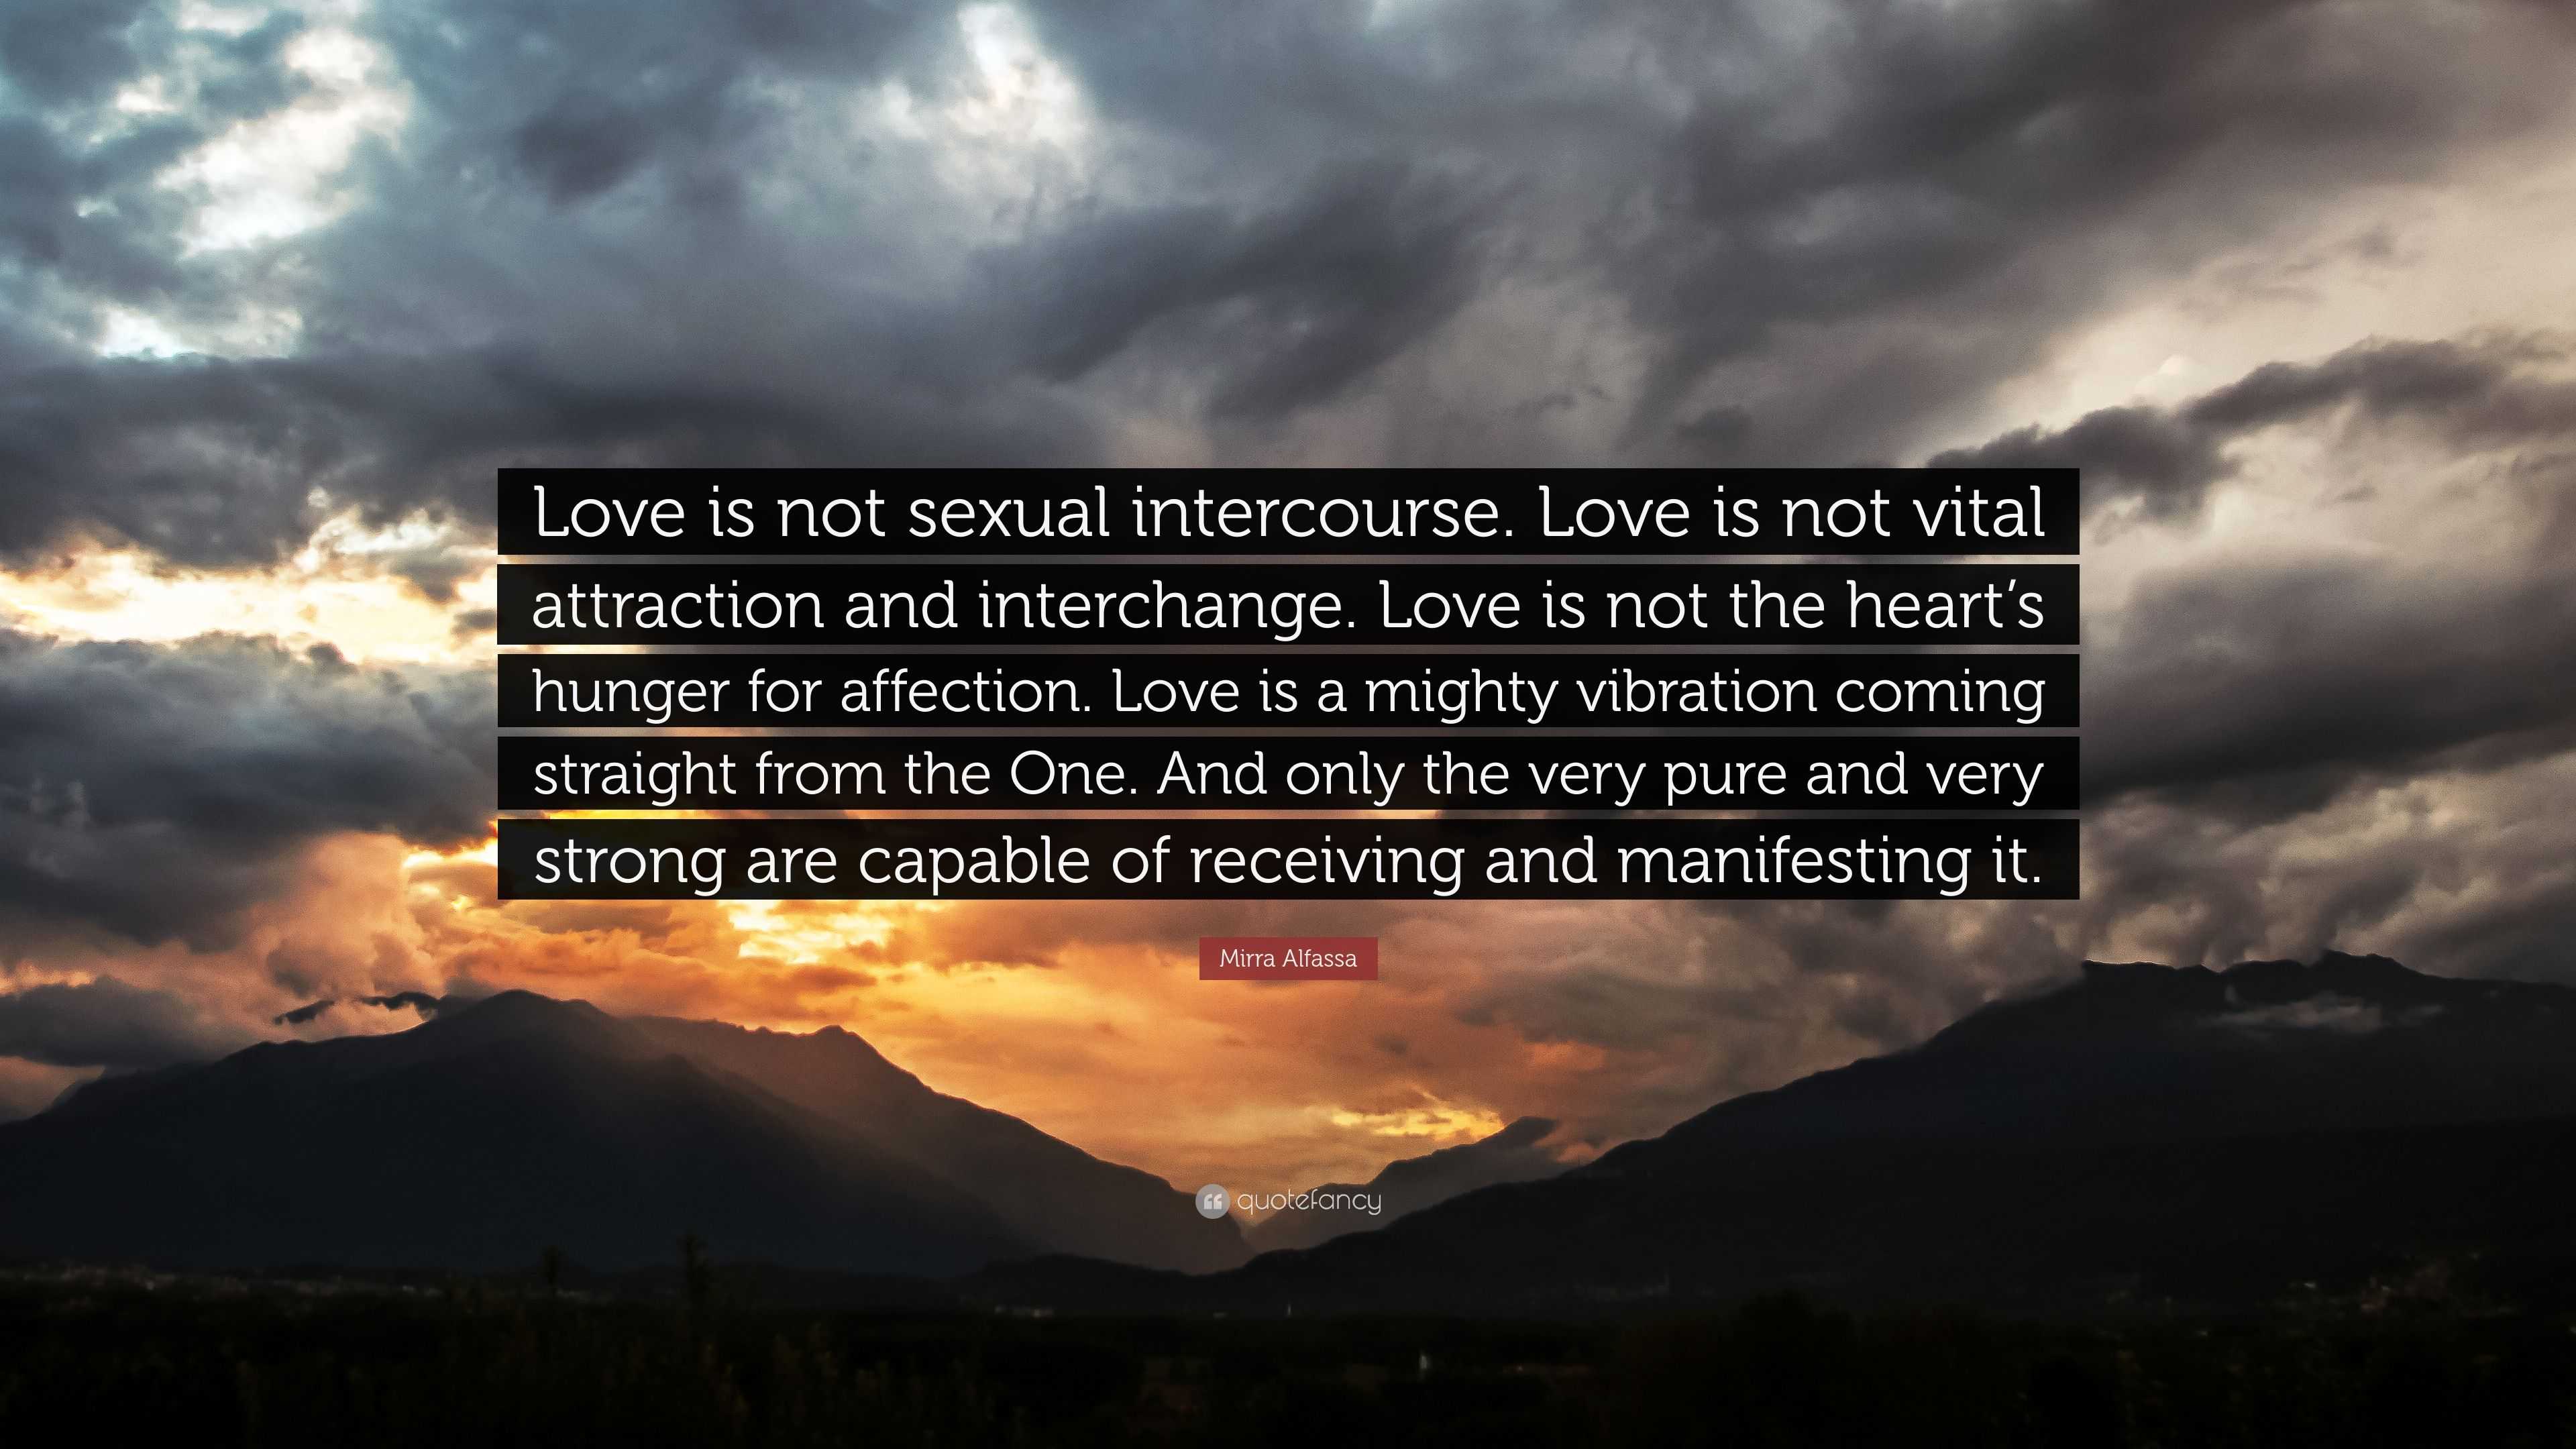 Mirra Alfassa Quote “Love is not ual intercourse Love is not vital attraction